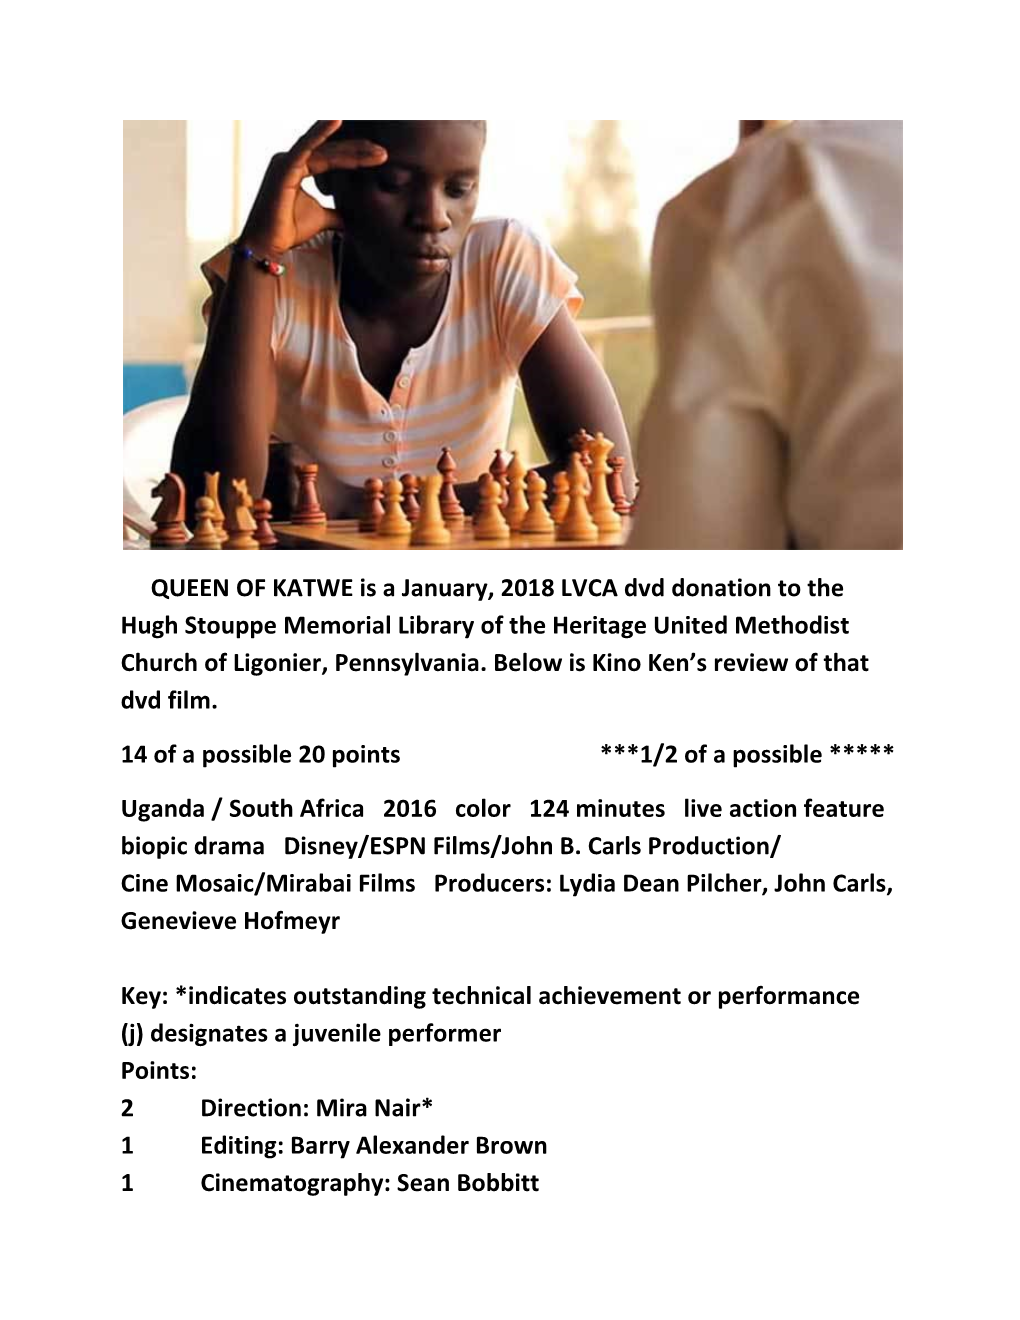 QUEEN of KATWE Is a January, 2018 LVCA Dvd Donation to the Hugh Stouppe Memorial Library of the Heritage United Methodist Church of Ligonier, Pennsylvania